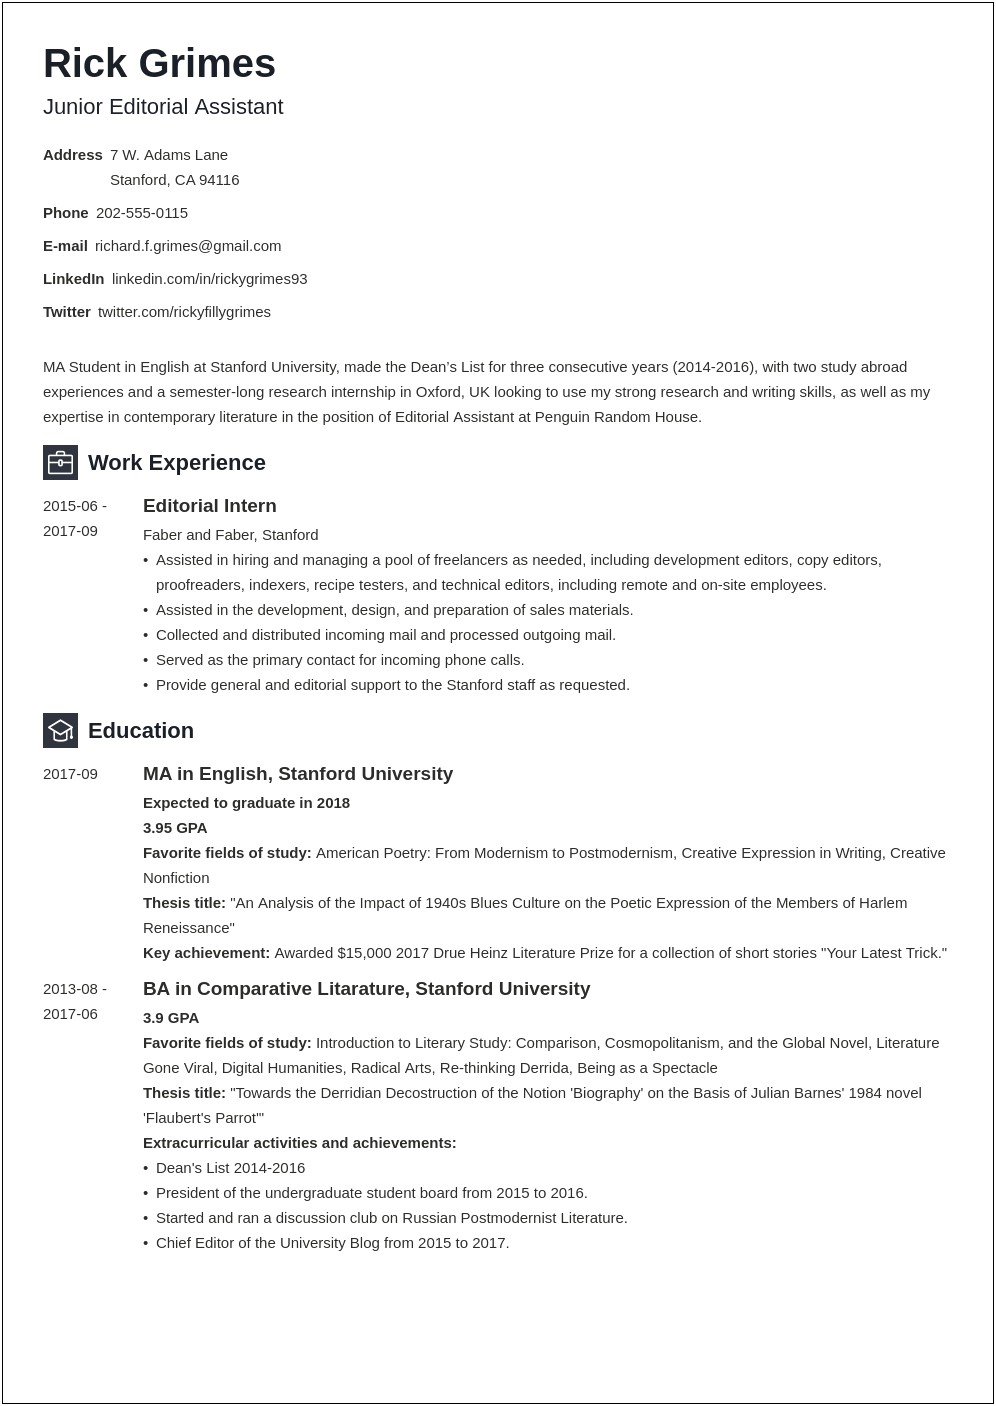 Sample Resumes With One Year Experience